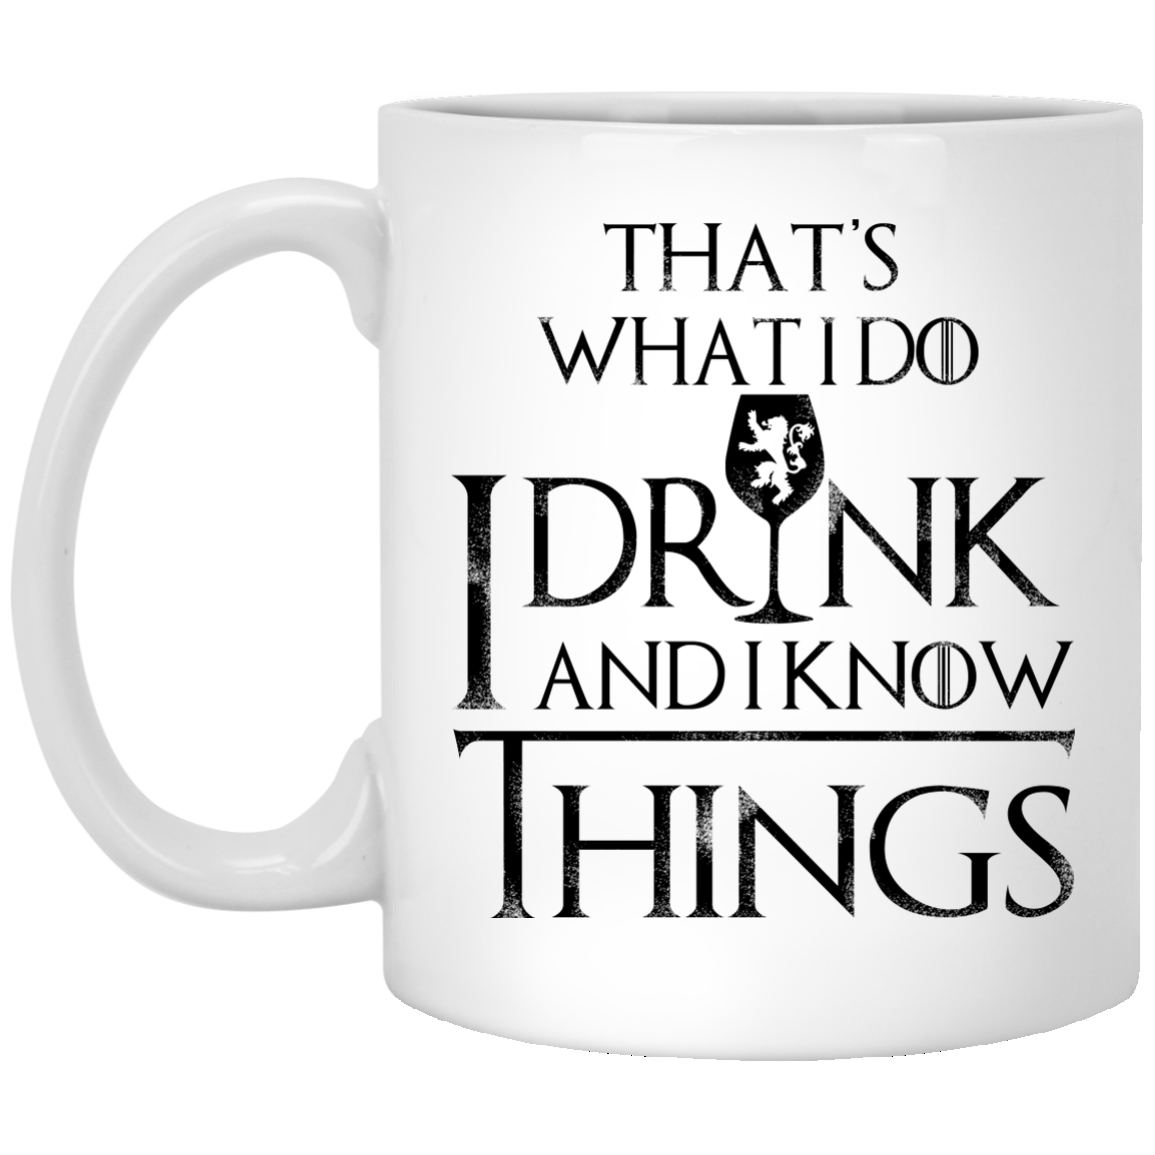 That's what I do: I drink and I know things mug, beer stein